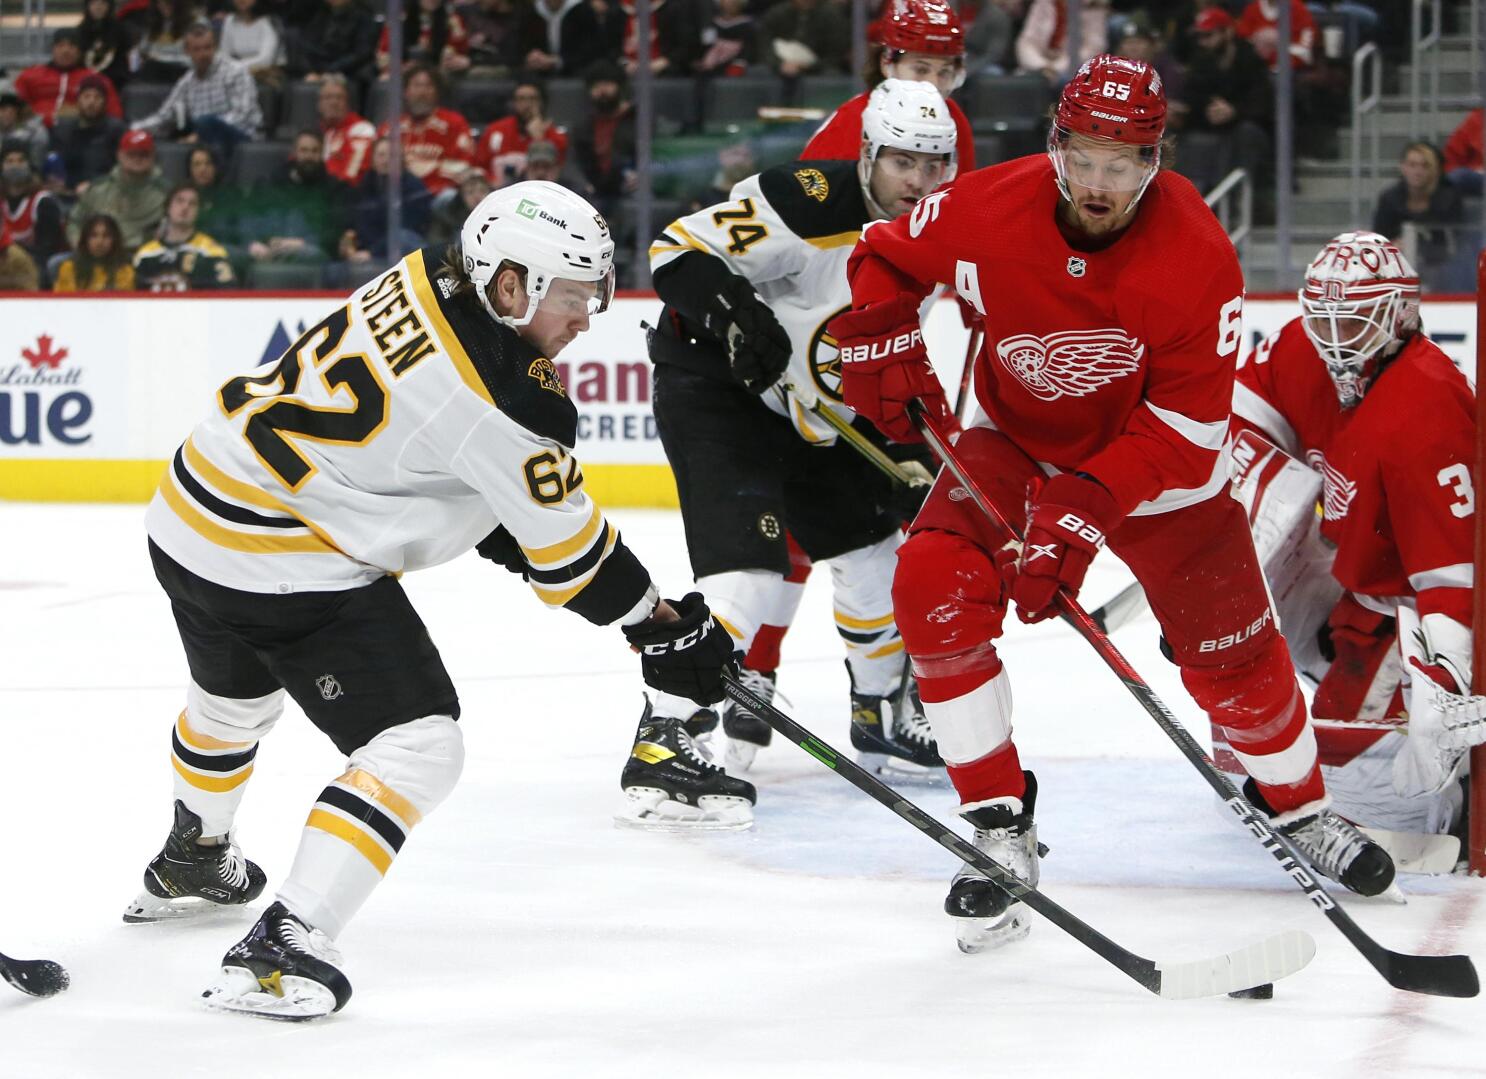 Patrice Bergeron scores 4 goals, Bruins top Red Wings 5-1